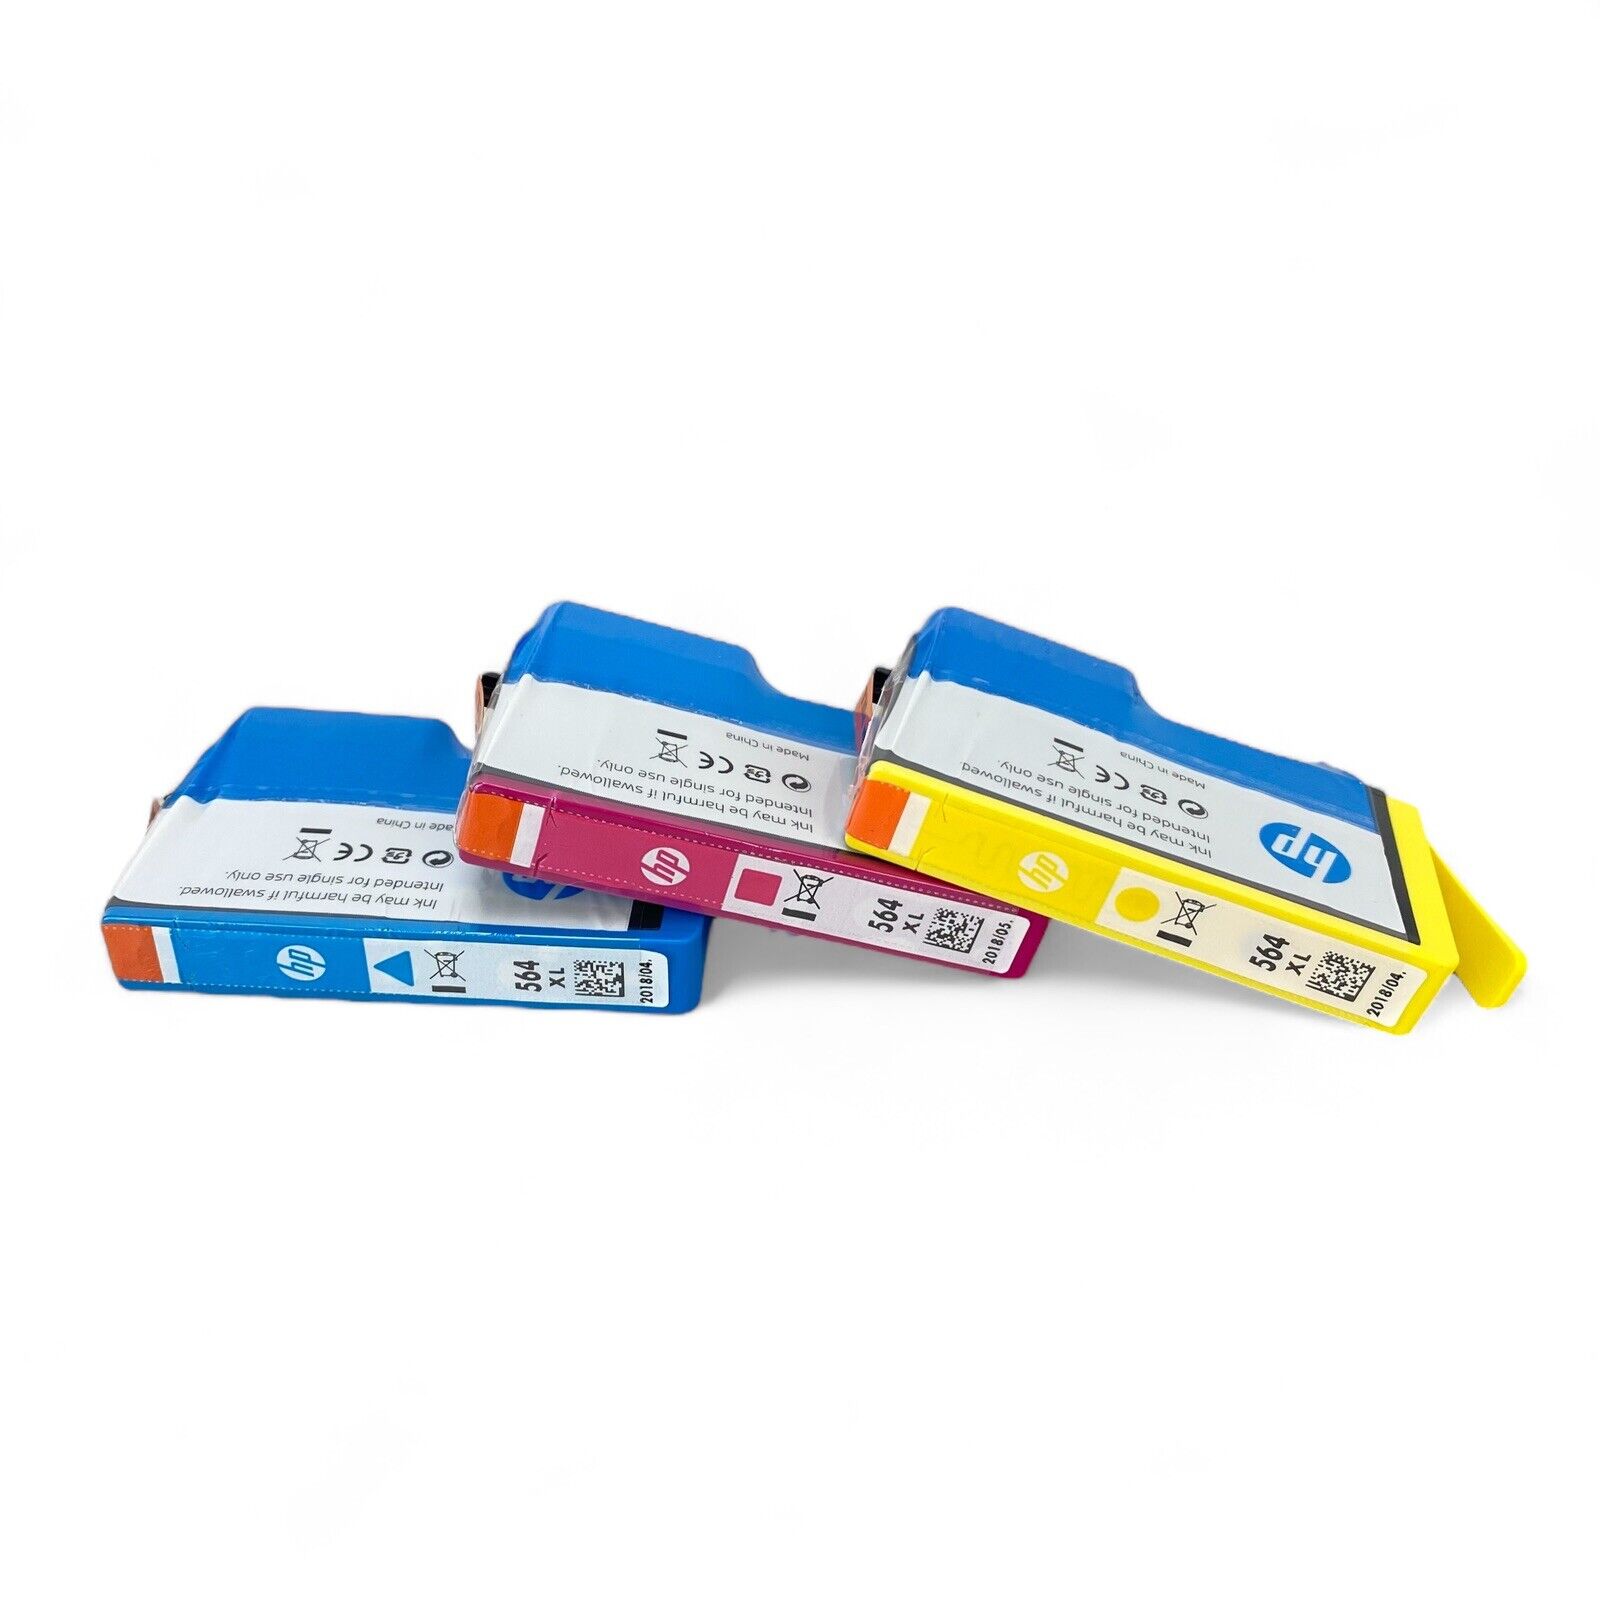 HP 564 Combo Pack Yellow Cyan Magenta Ink Cartridges - Expired 4/2018